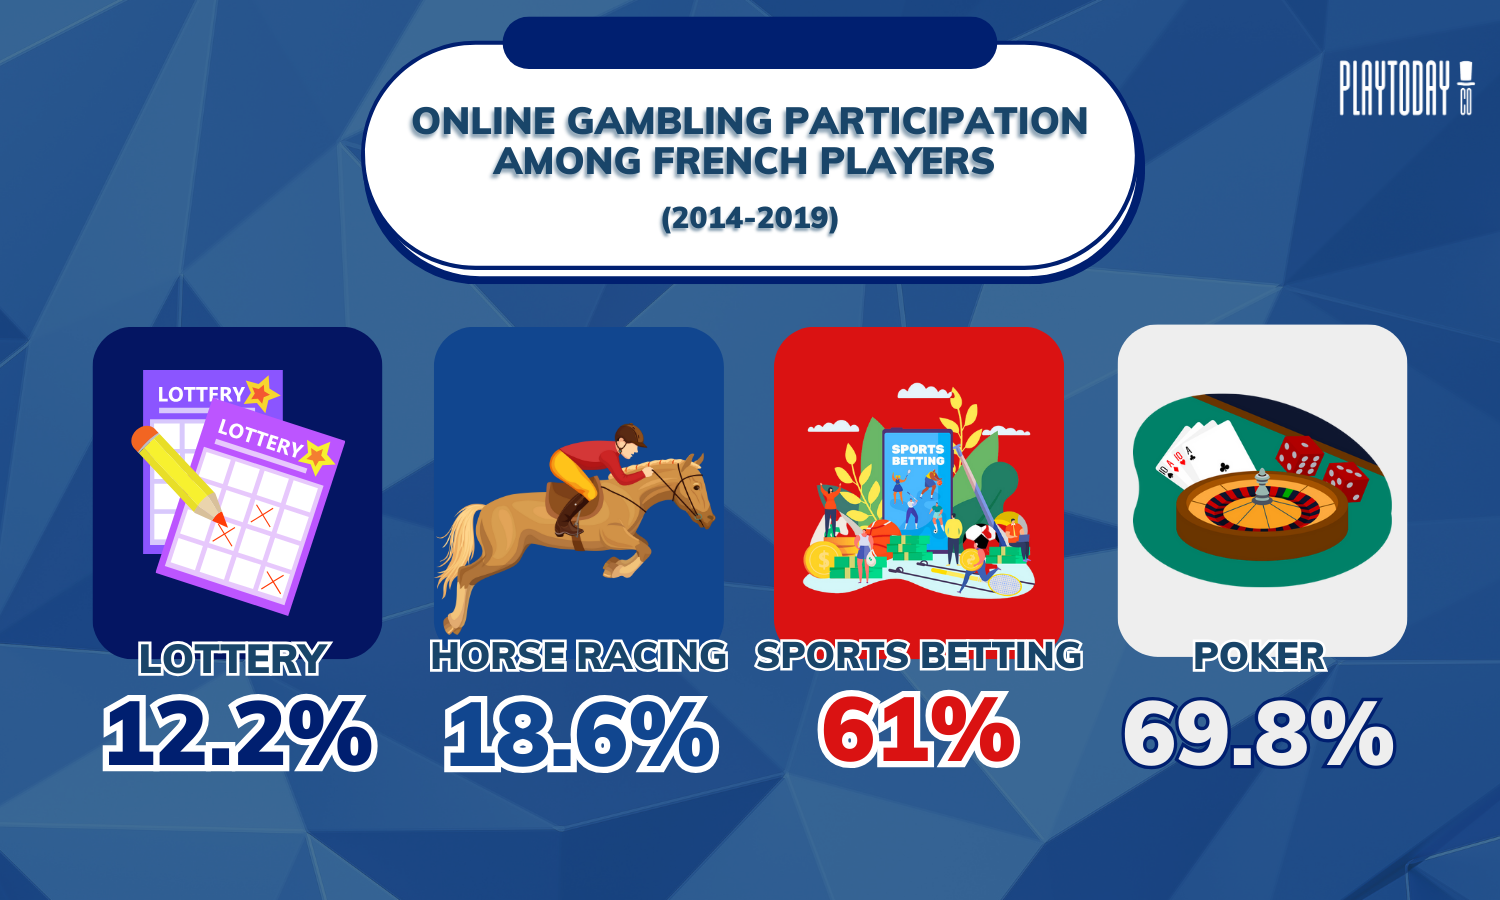 Online Gambling Participation in France (2014-2019)